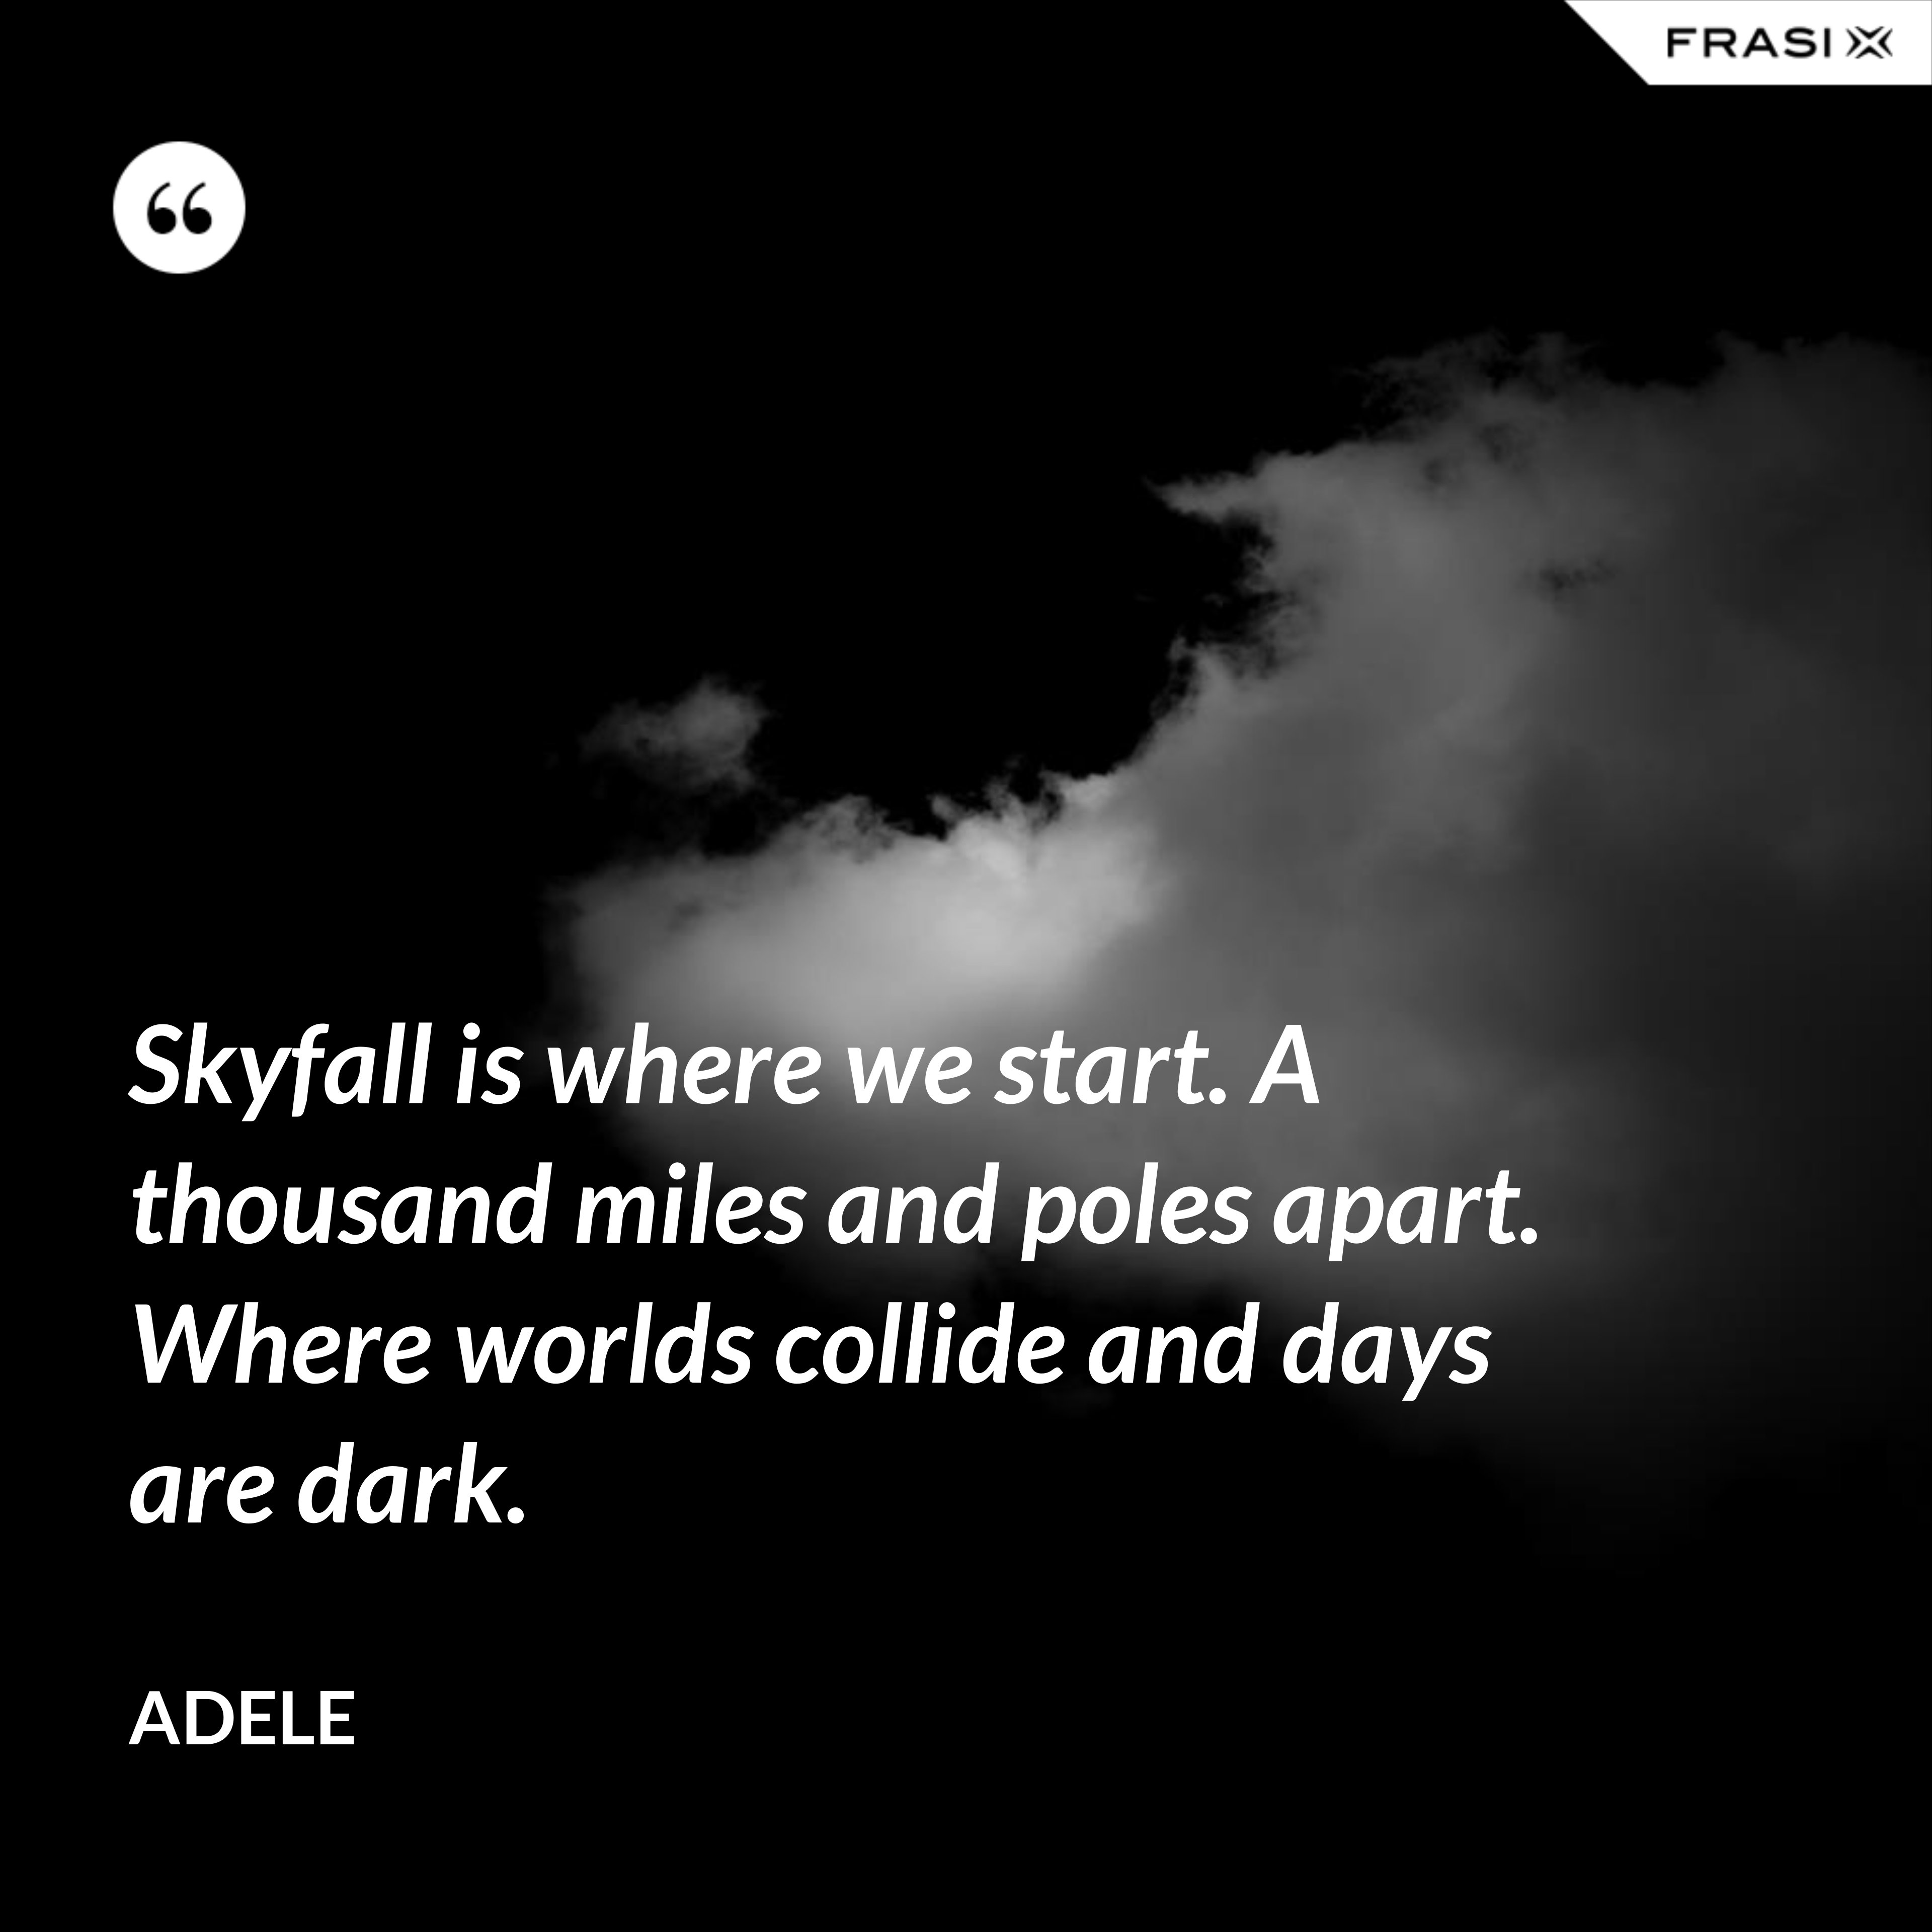 Skyfall is where we start. A thousand miles and poles apart. Where worlds collide and days are dark. - Adele